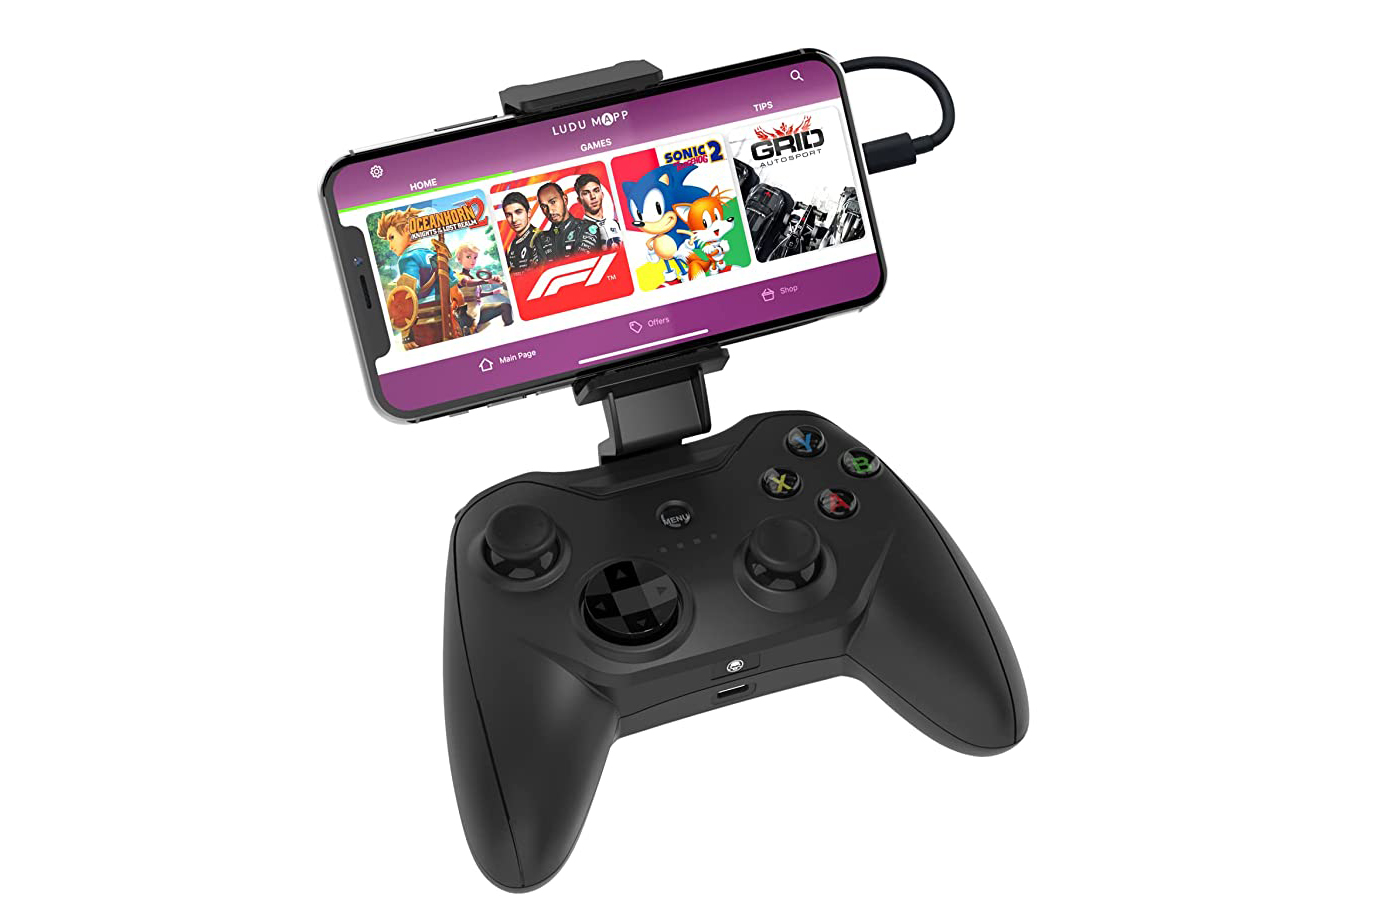 keten Beg Pedagogie The best game controllers for the iPhone | Digital Trends